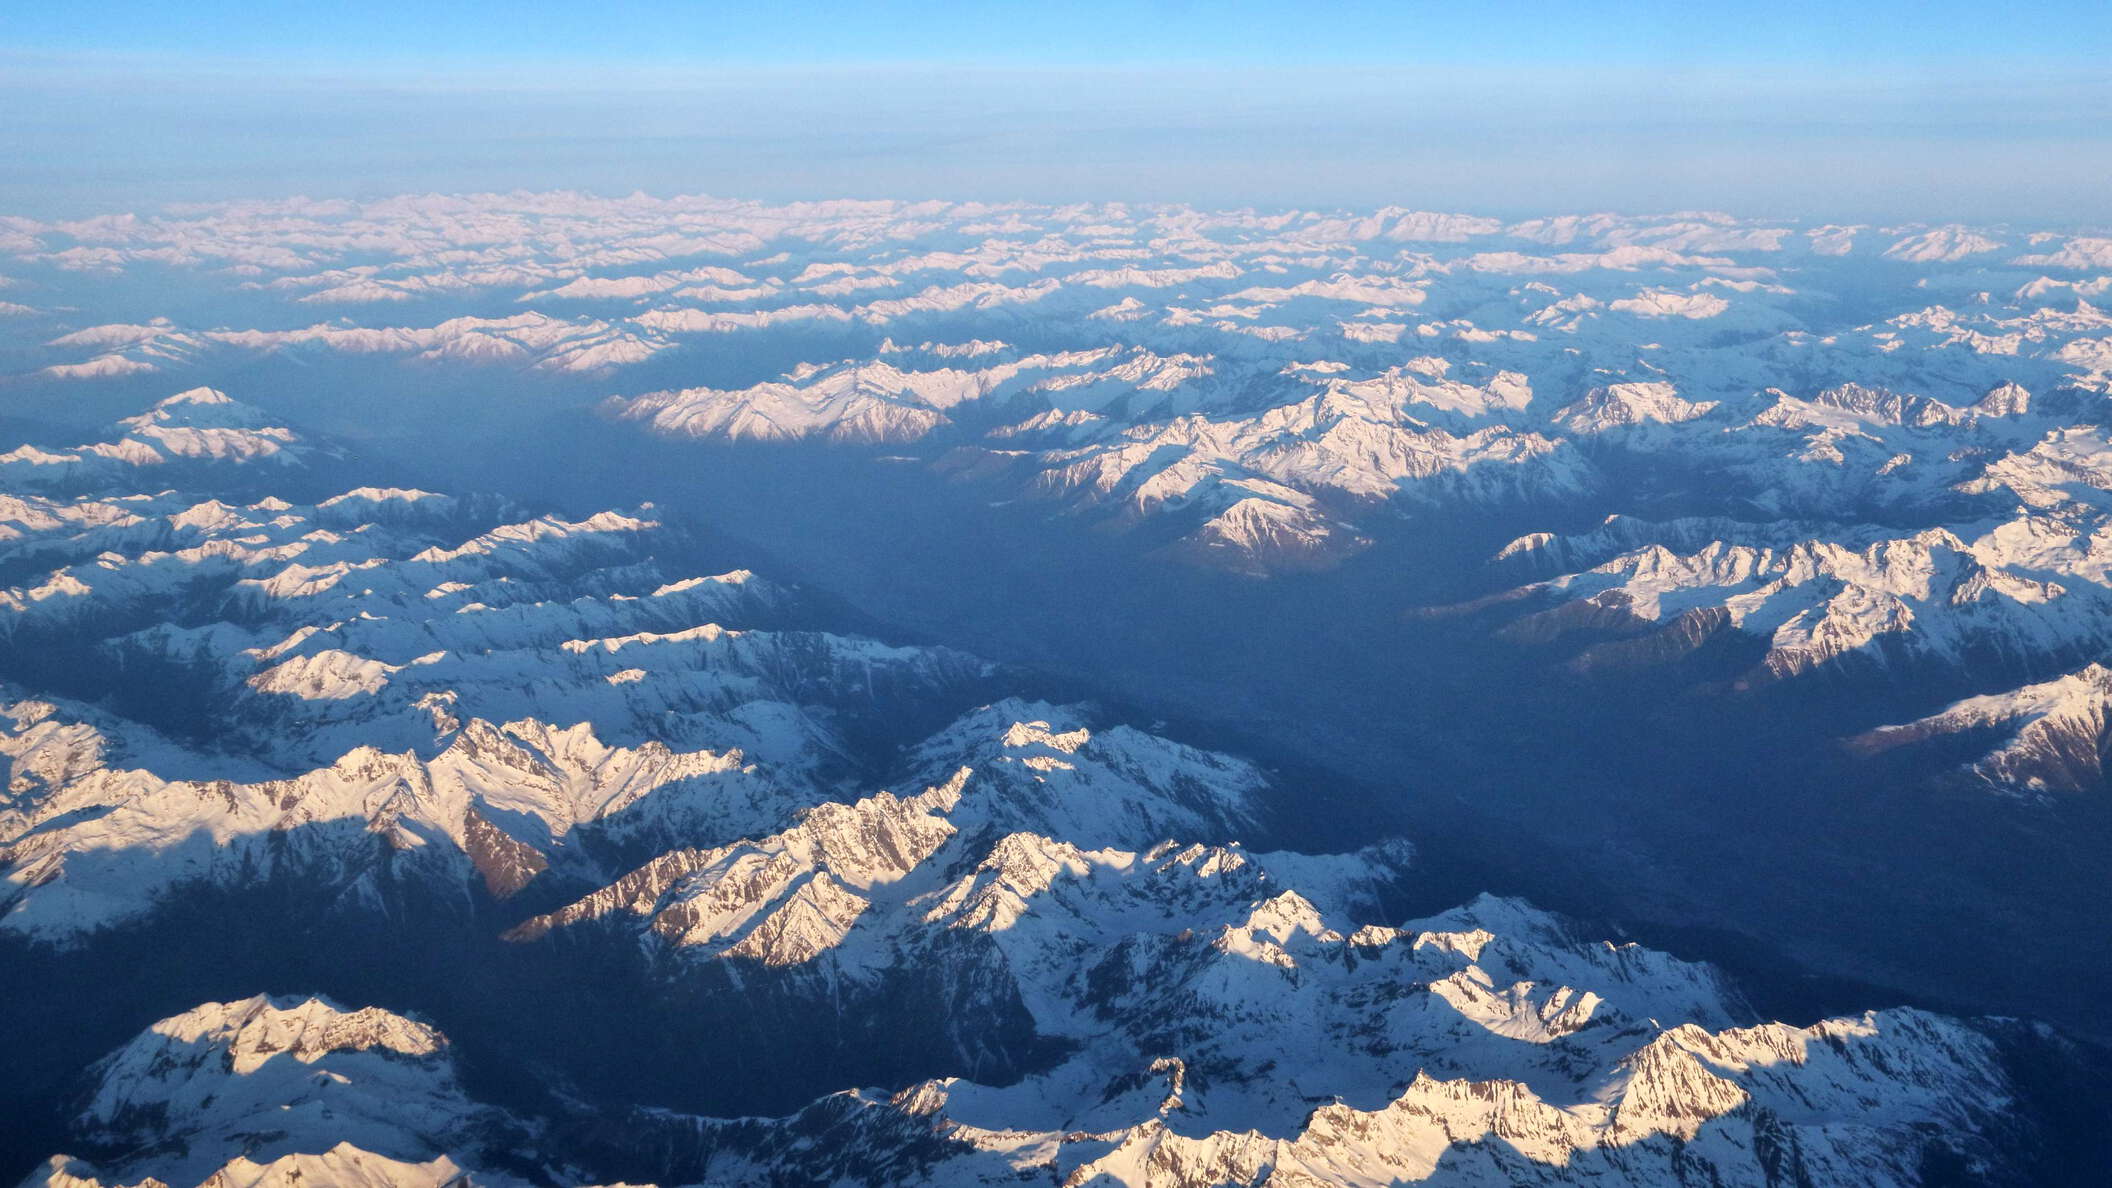 Valtellina from the air